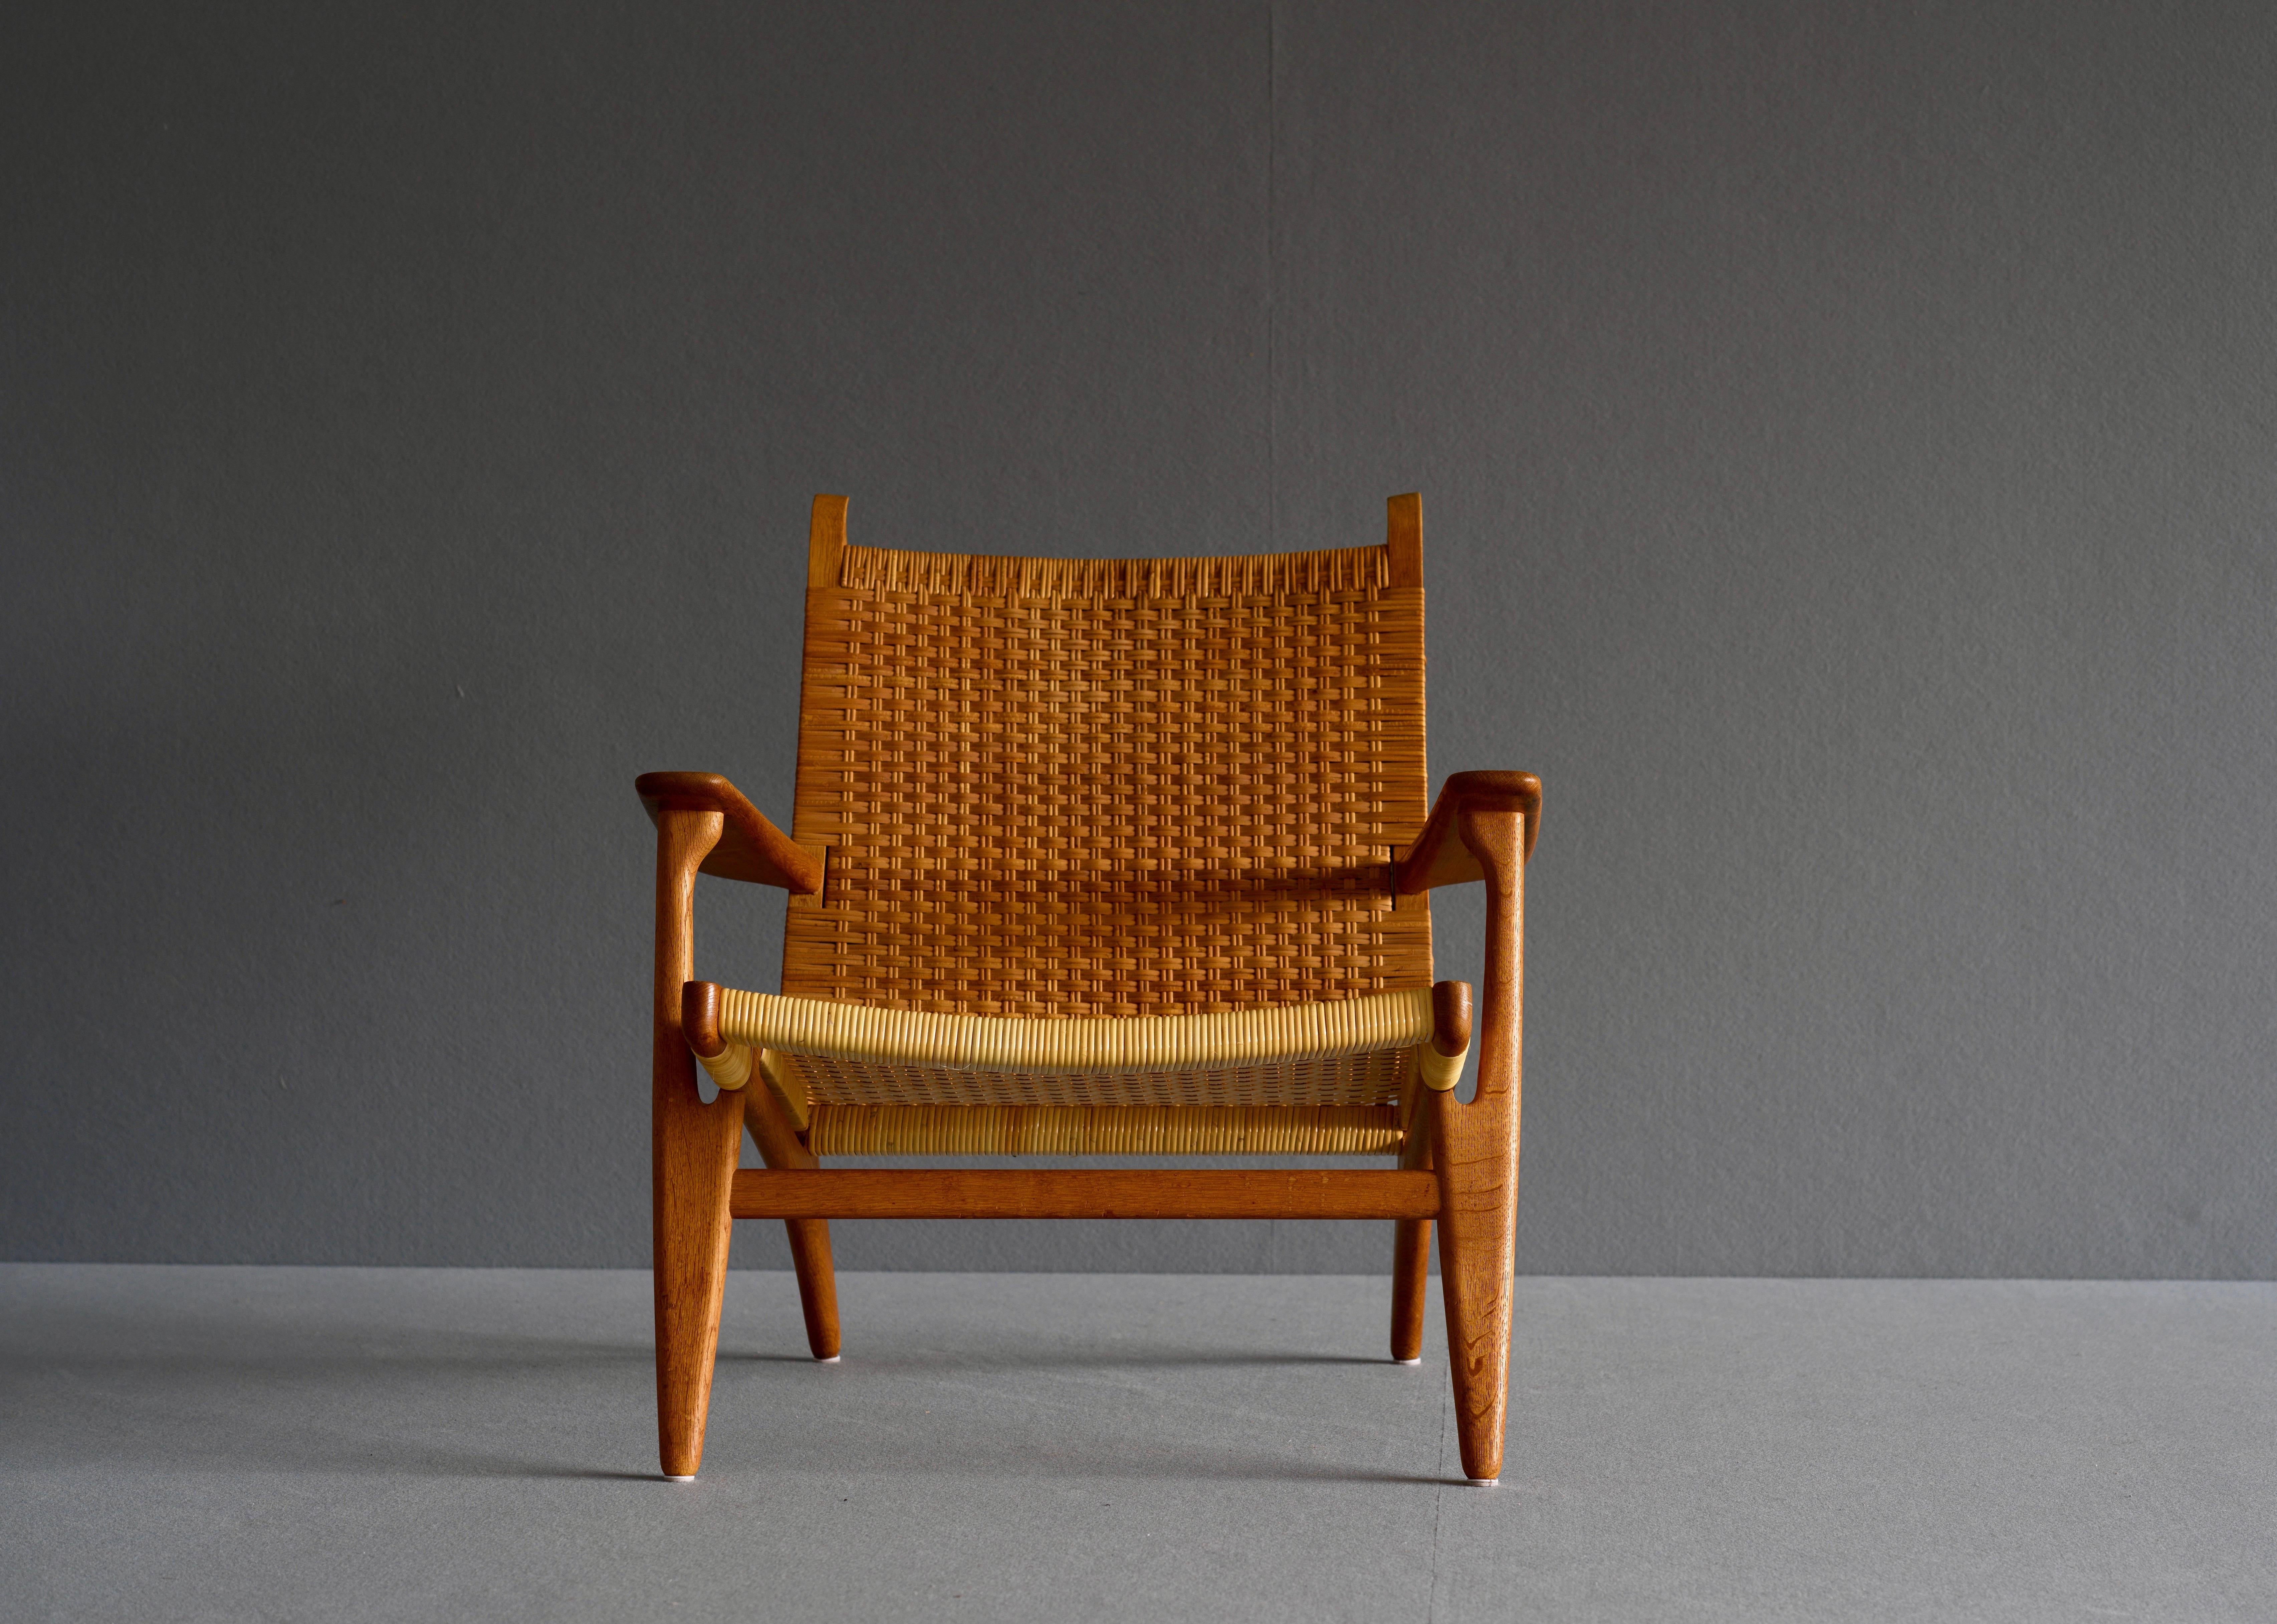 Lounge chair by Hans Wegner for Carl Hansen. it is in solid oak with the seta and back fitted with woven cane. This stunning lounge chair was designed in the 1950’s and represents a highlight in Wegner’s production. It went out of production in the